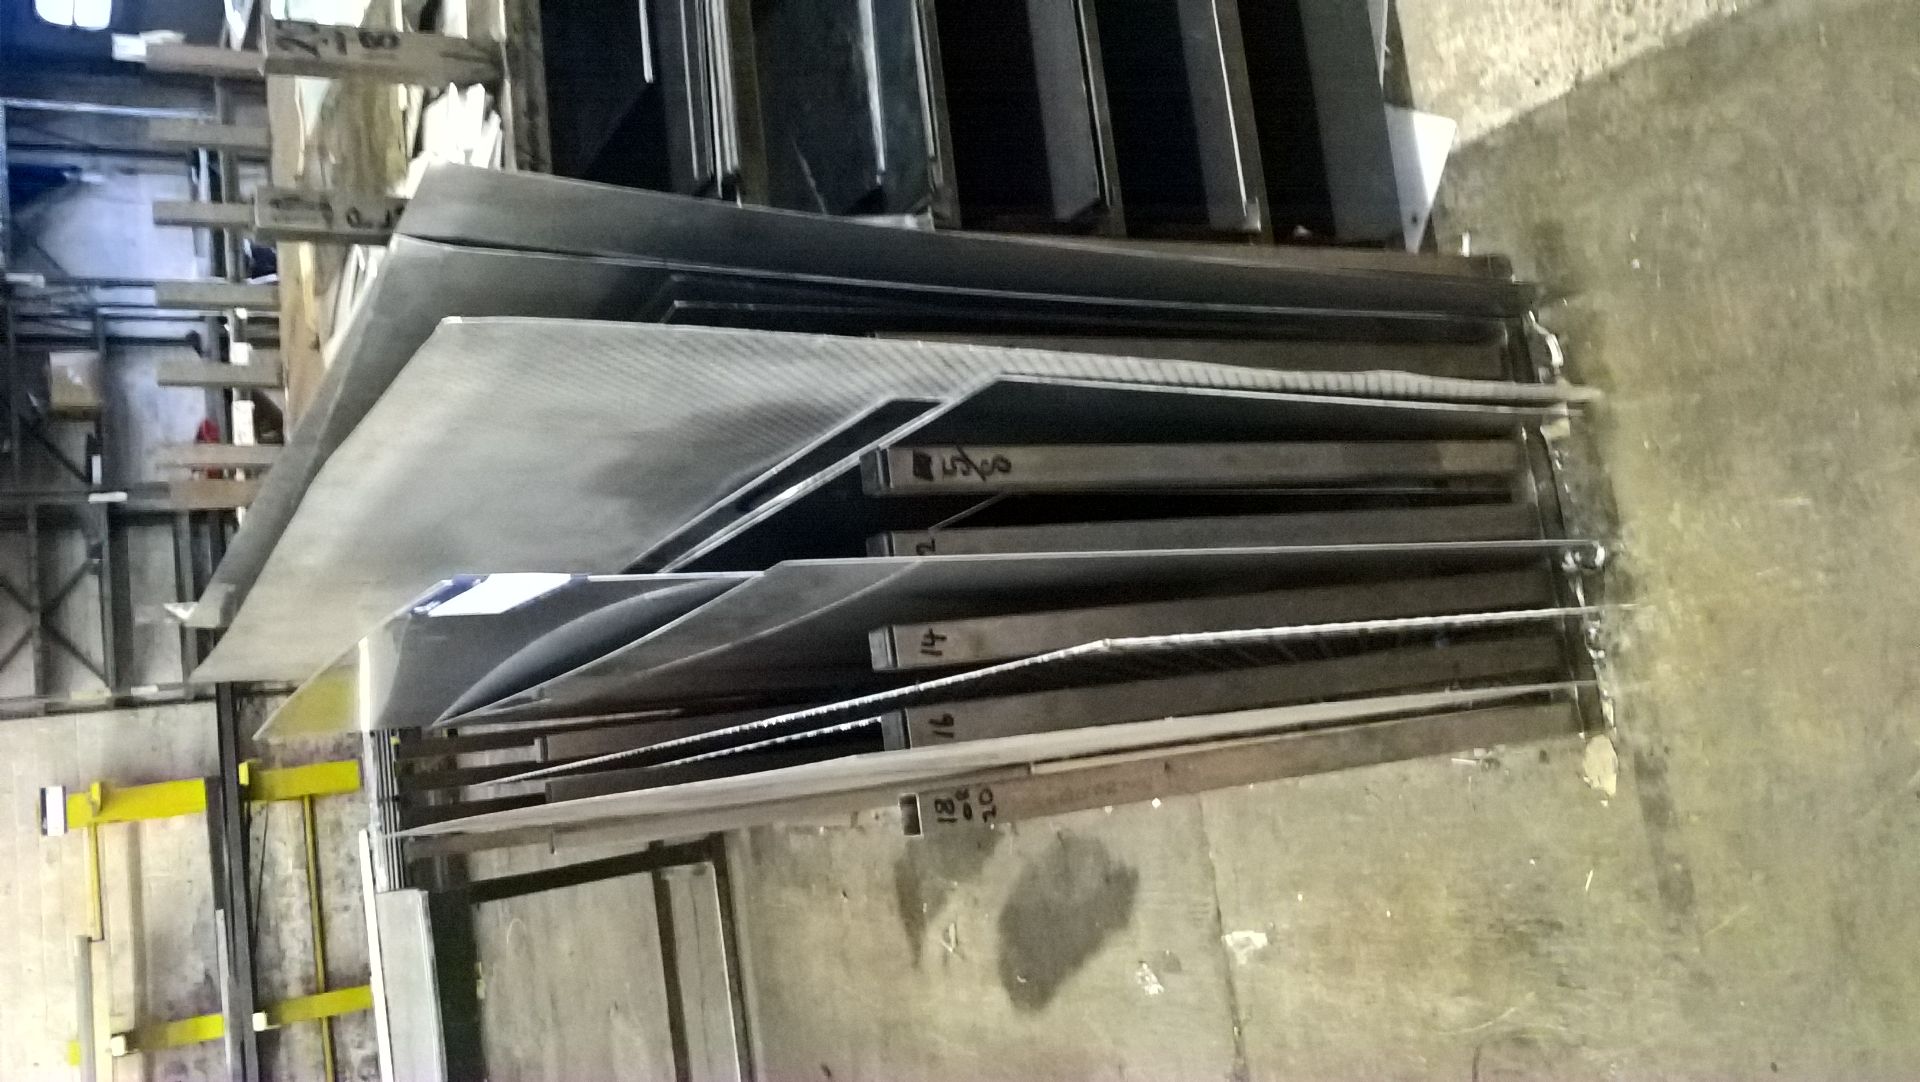 Mild Steel/Stainless Steel & Aluminium Sheets/Off-Cuts, including three cold rolled steel, three 3. - Image 2 of 4